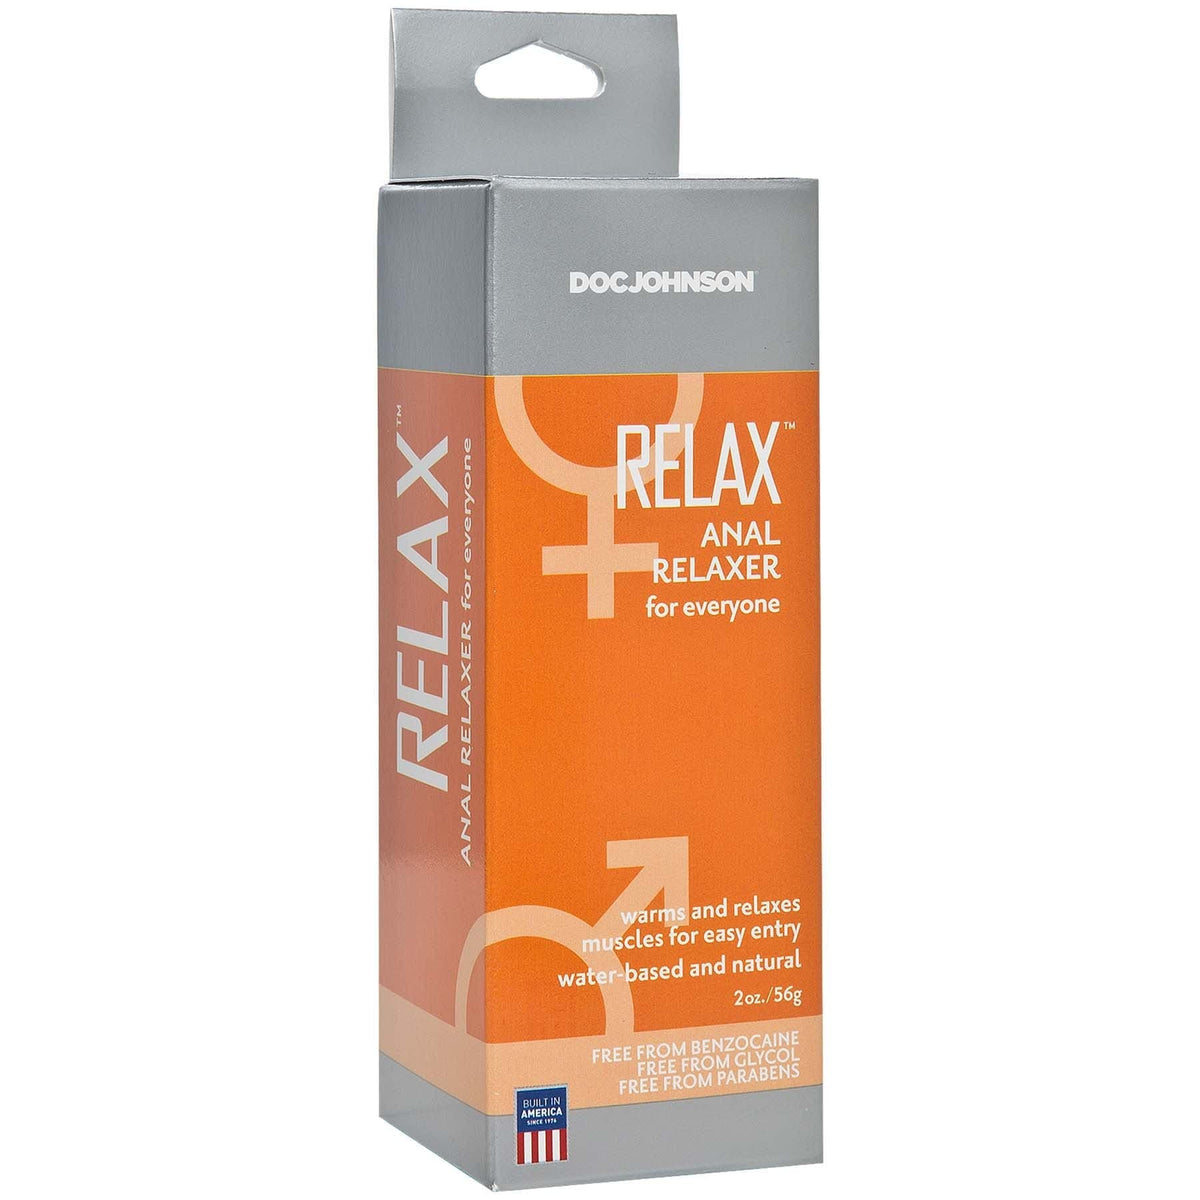 relax anal relaxer for everyone 2 oz boxed